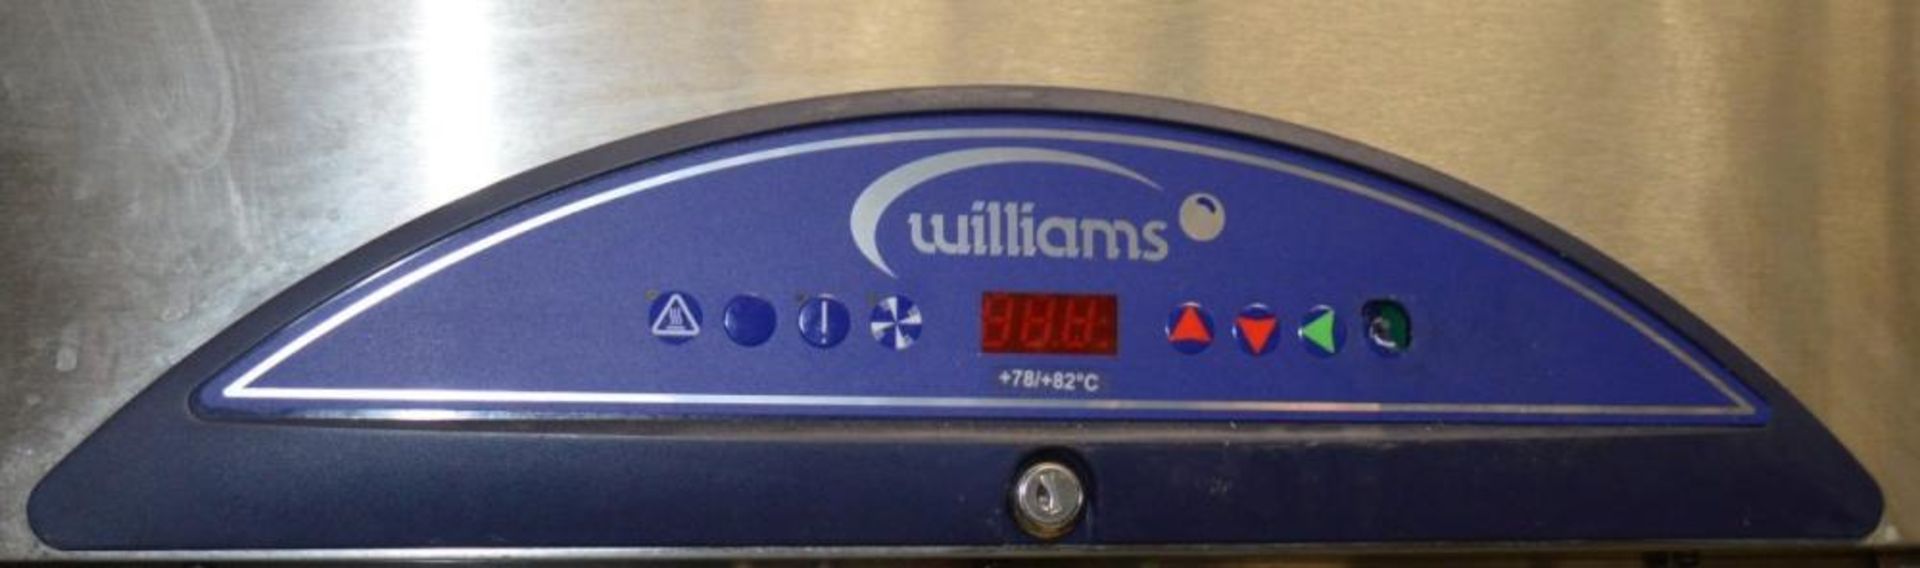 1 x Williams Williams 2-Sided Upright Hot Food Hold Cabinet (78-82°c) (XG1TSS) - Opens Either Side - - Image 6 of 6